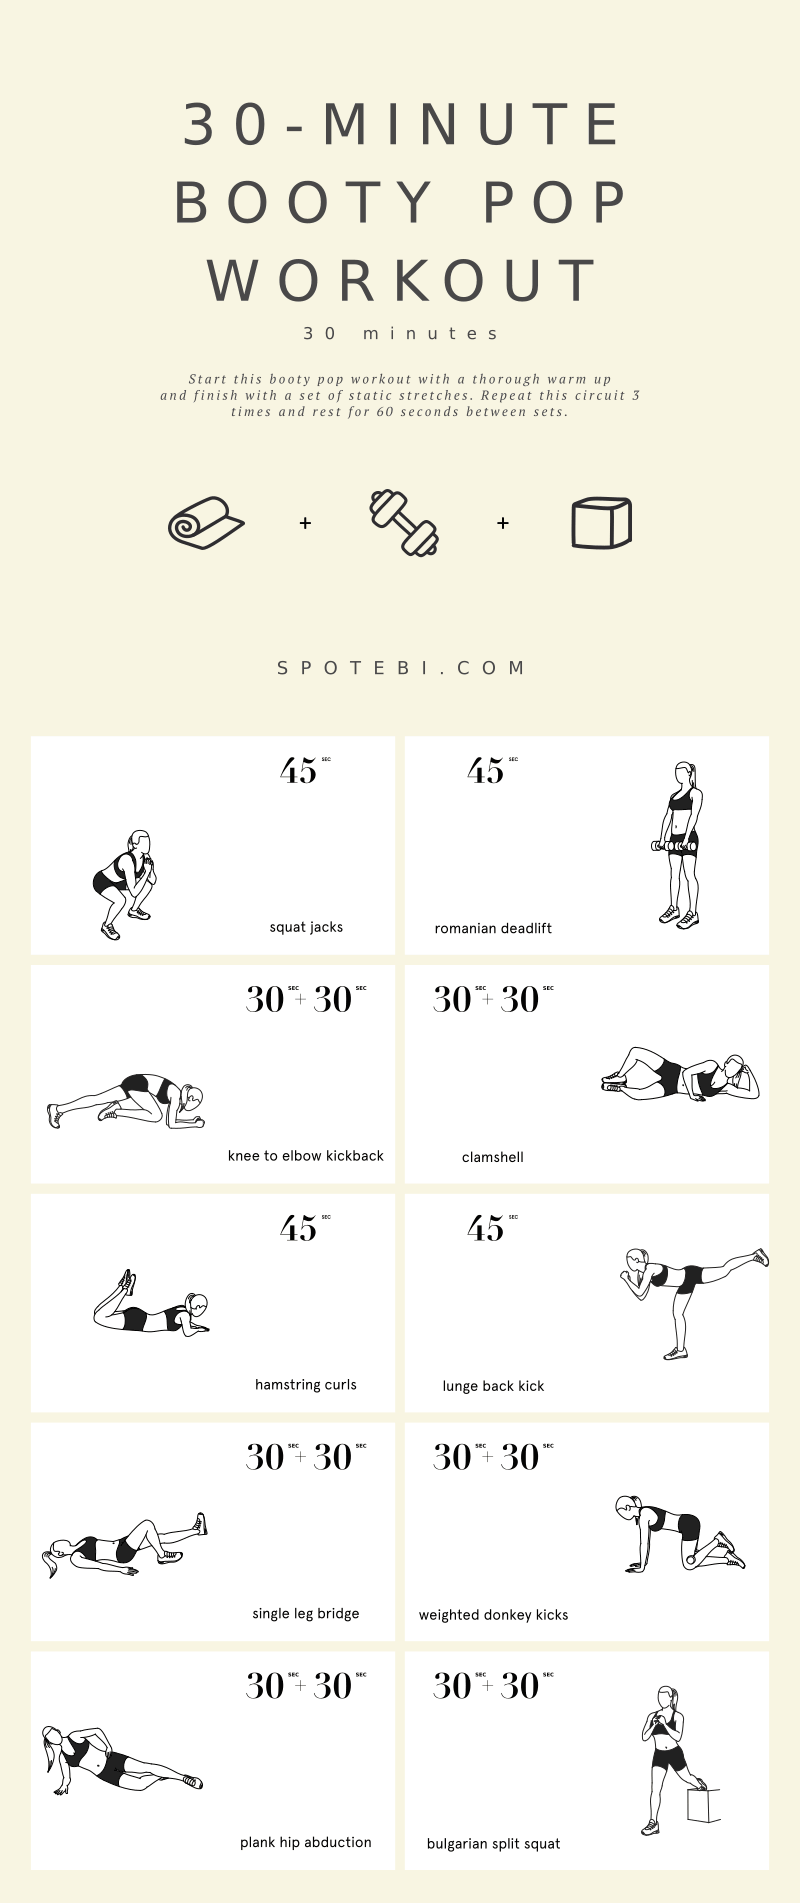 This intense 30-minute booty pop workout for women will bring your muscles to full fatigue while keeping your heart rate up! https://www.spotebi.com/workout-routines/booty-pop-workout-bikini-body-sequence/